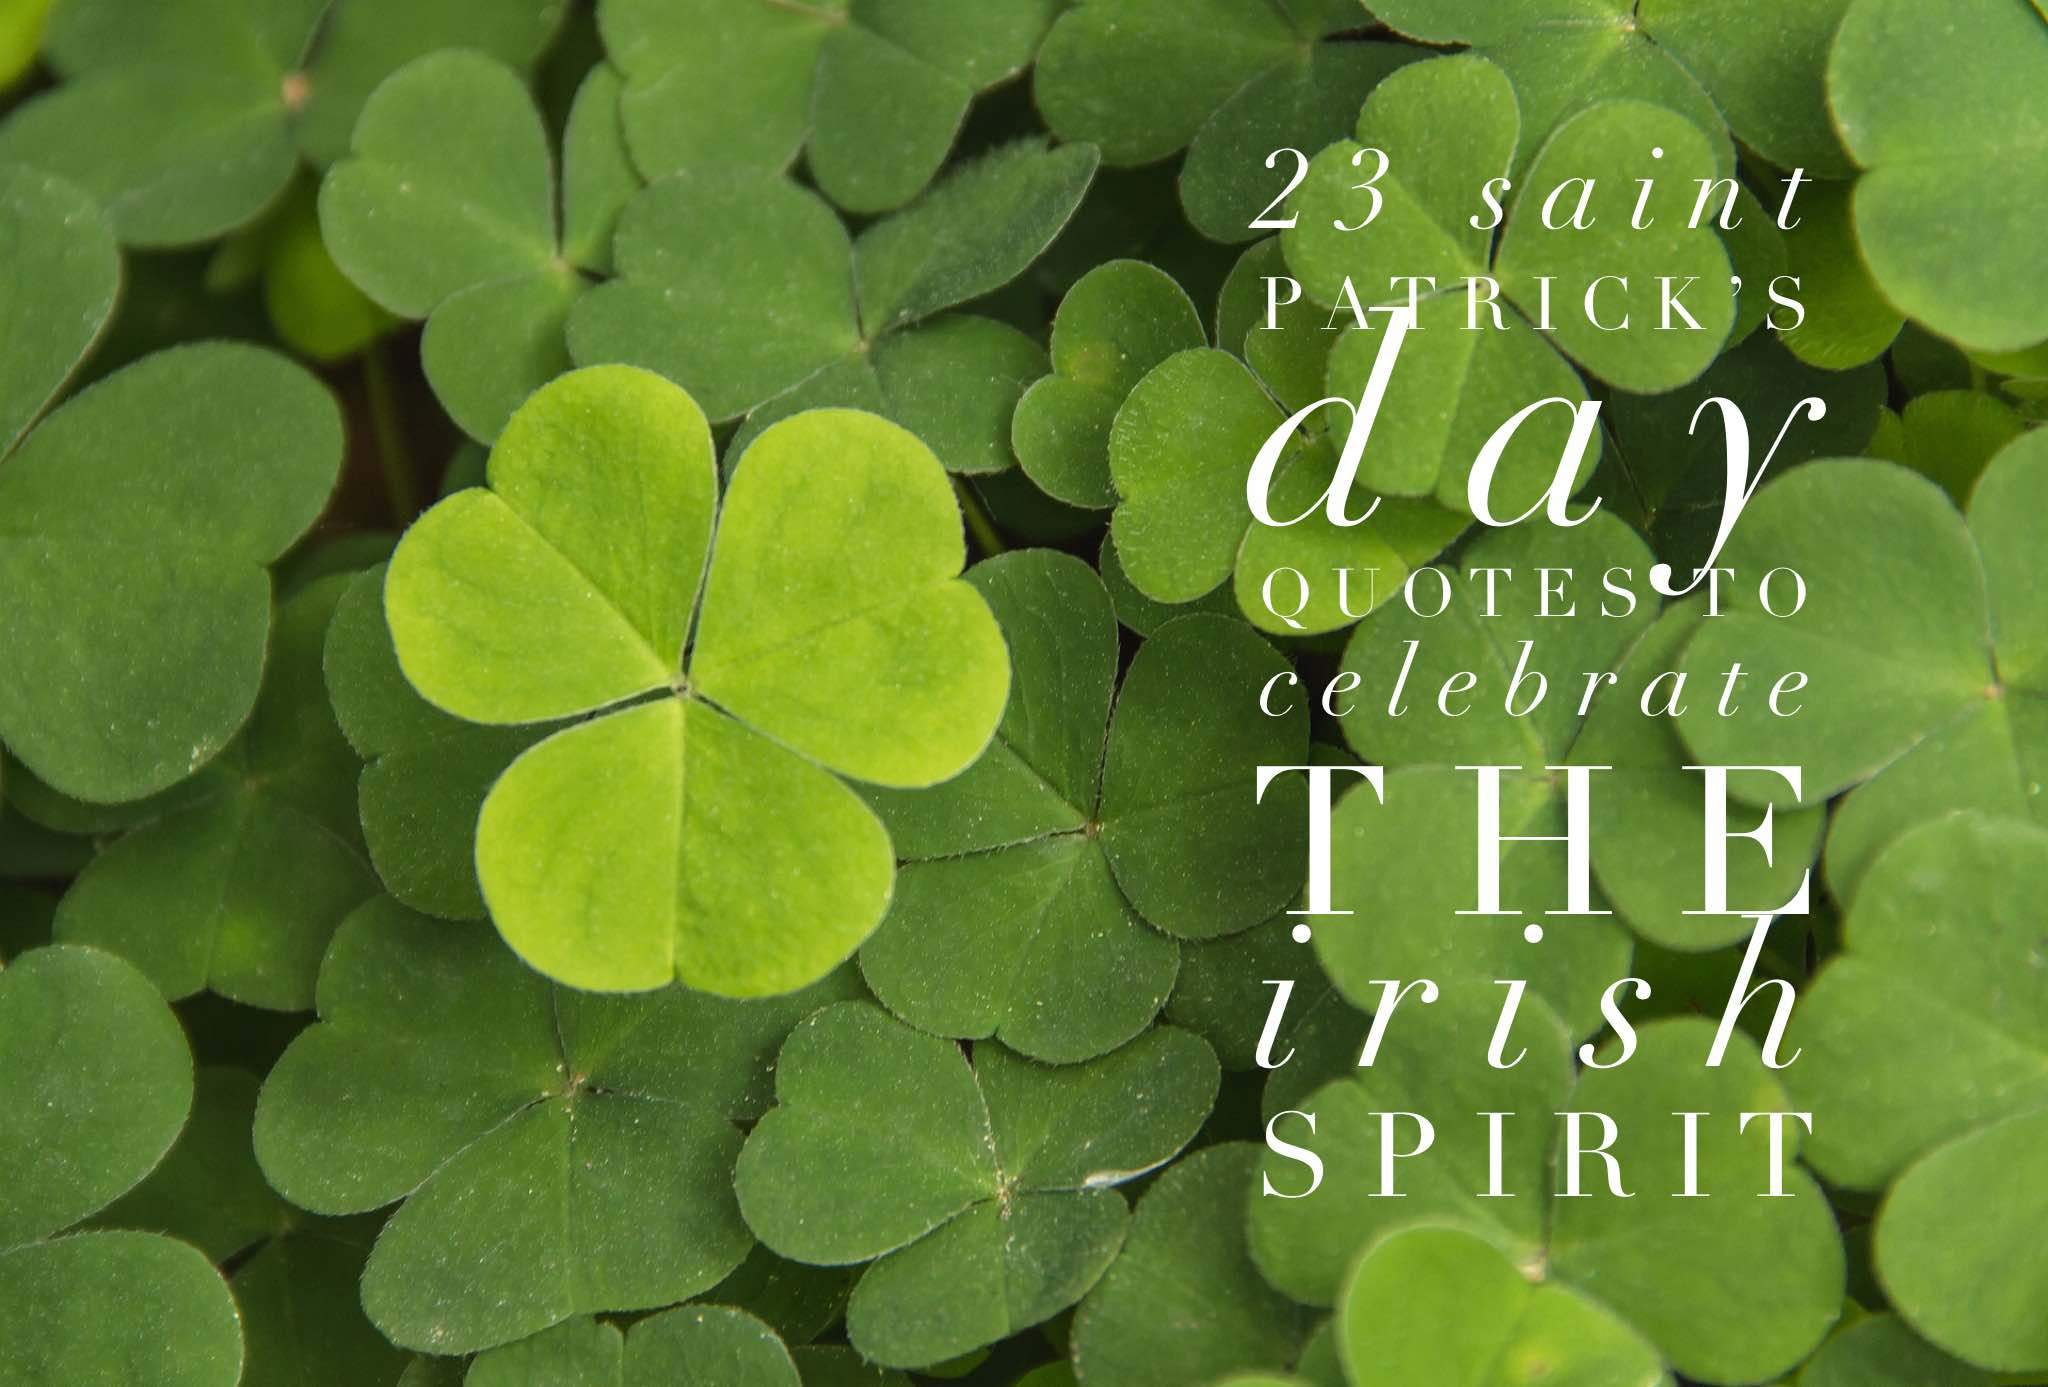 St Patrick's Day Inspirational Quotes
 17 Saint Patrick s Day Quotes to Celebrate the Irish